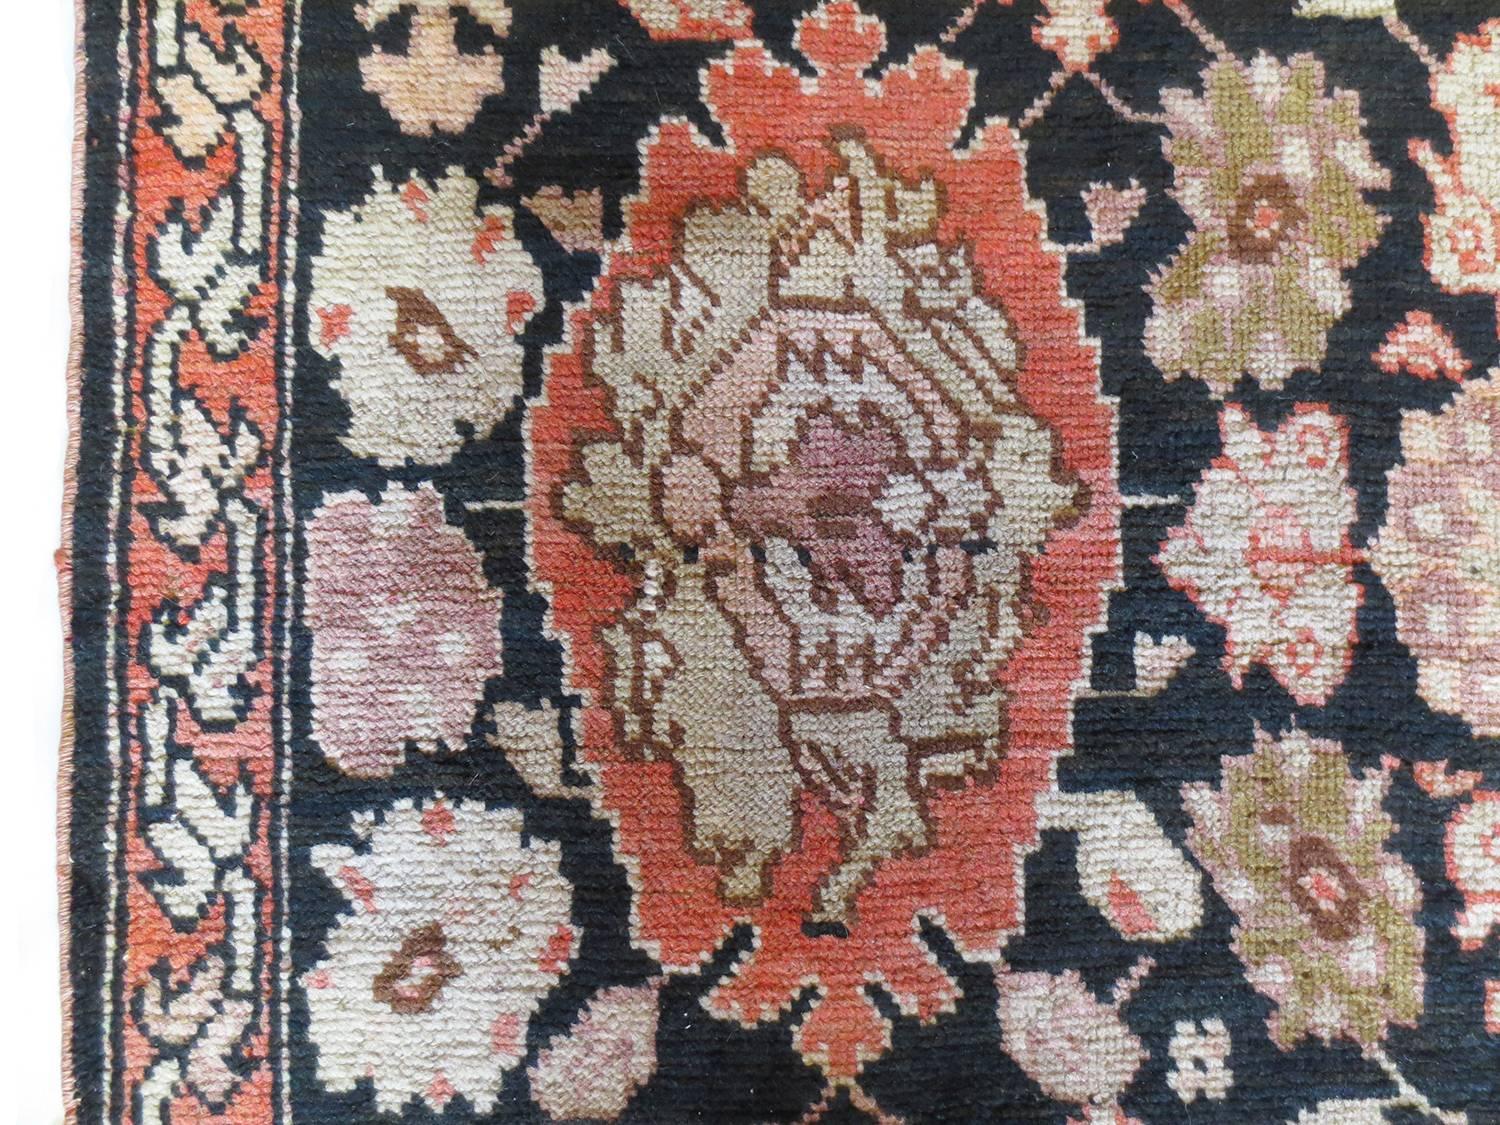 This is an antique Karabagh runner, circa 1880s. It features geometric motifs and rosettes filling the field on a black background with shades of salmon reds, ivory, pink, olive green. A thin border allows for the field to dominate and take canter